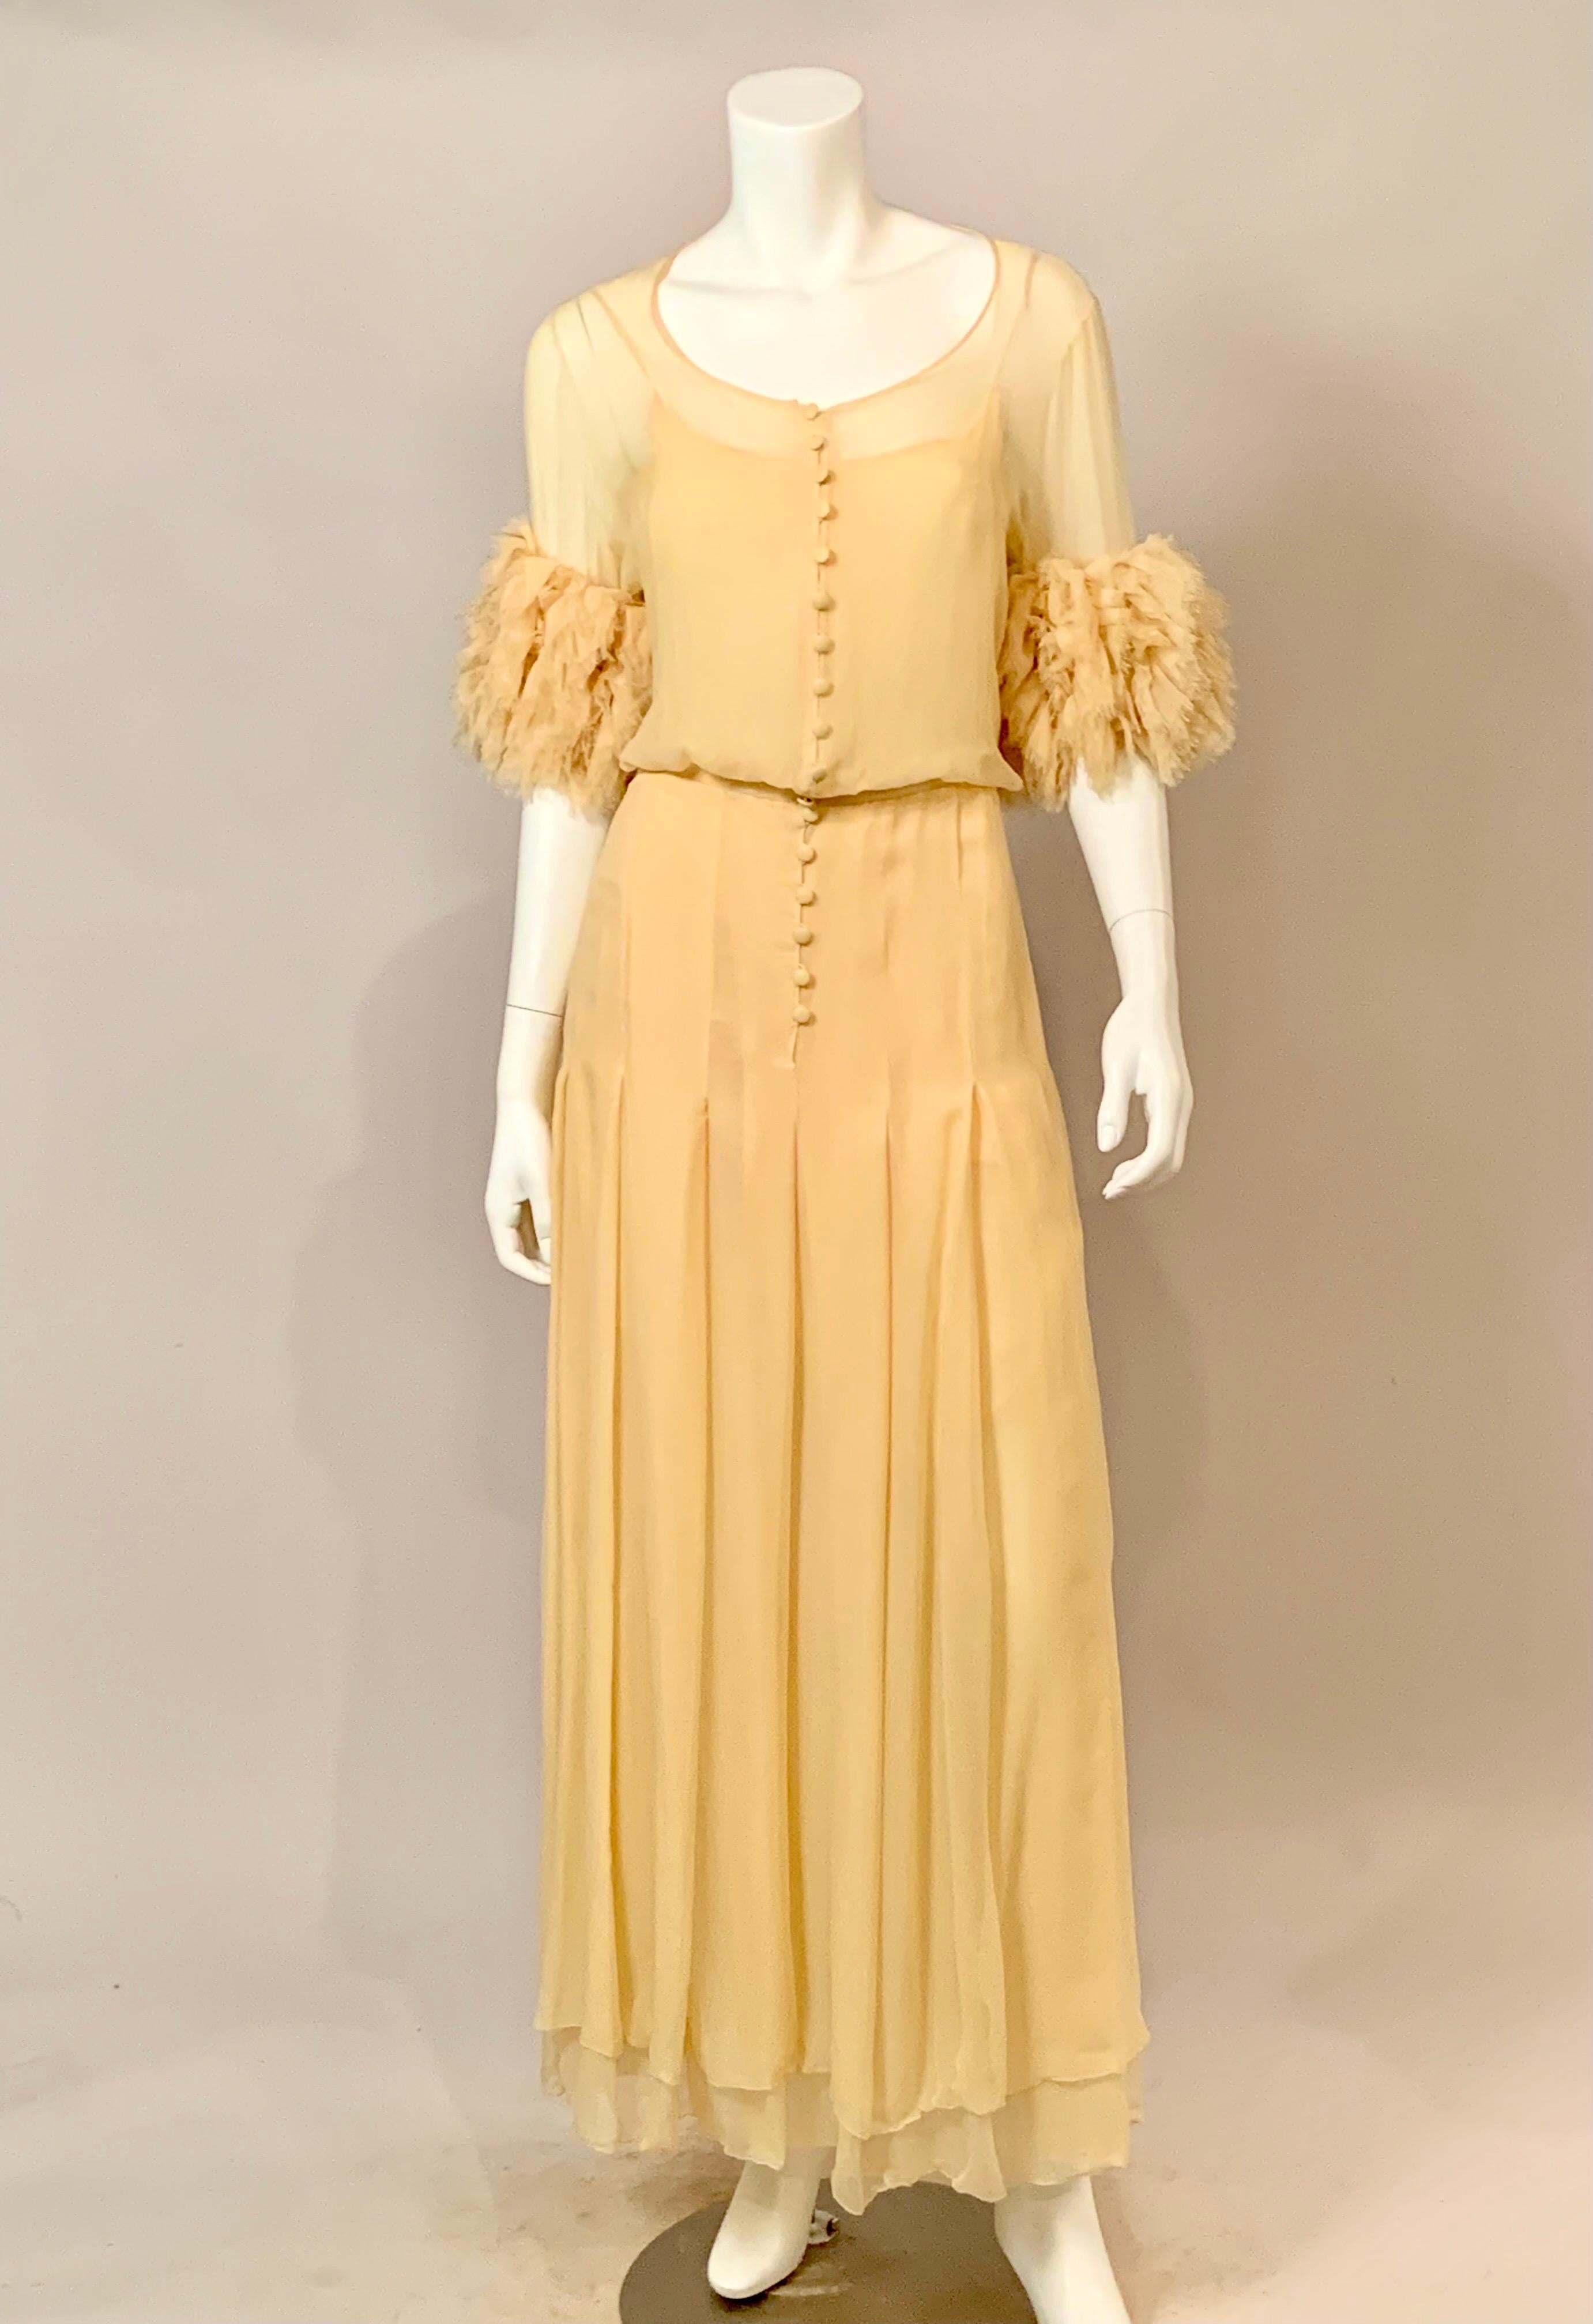 1984 Chanel by Karl Lagerfeld Butter Yellow Silk Chiffon Evening Gown Never Worn 13